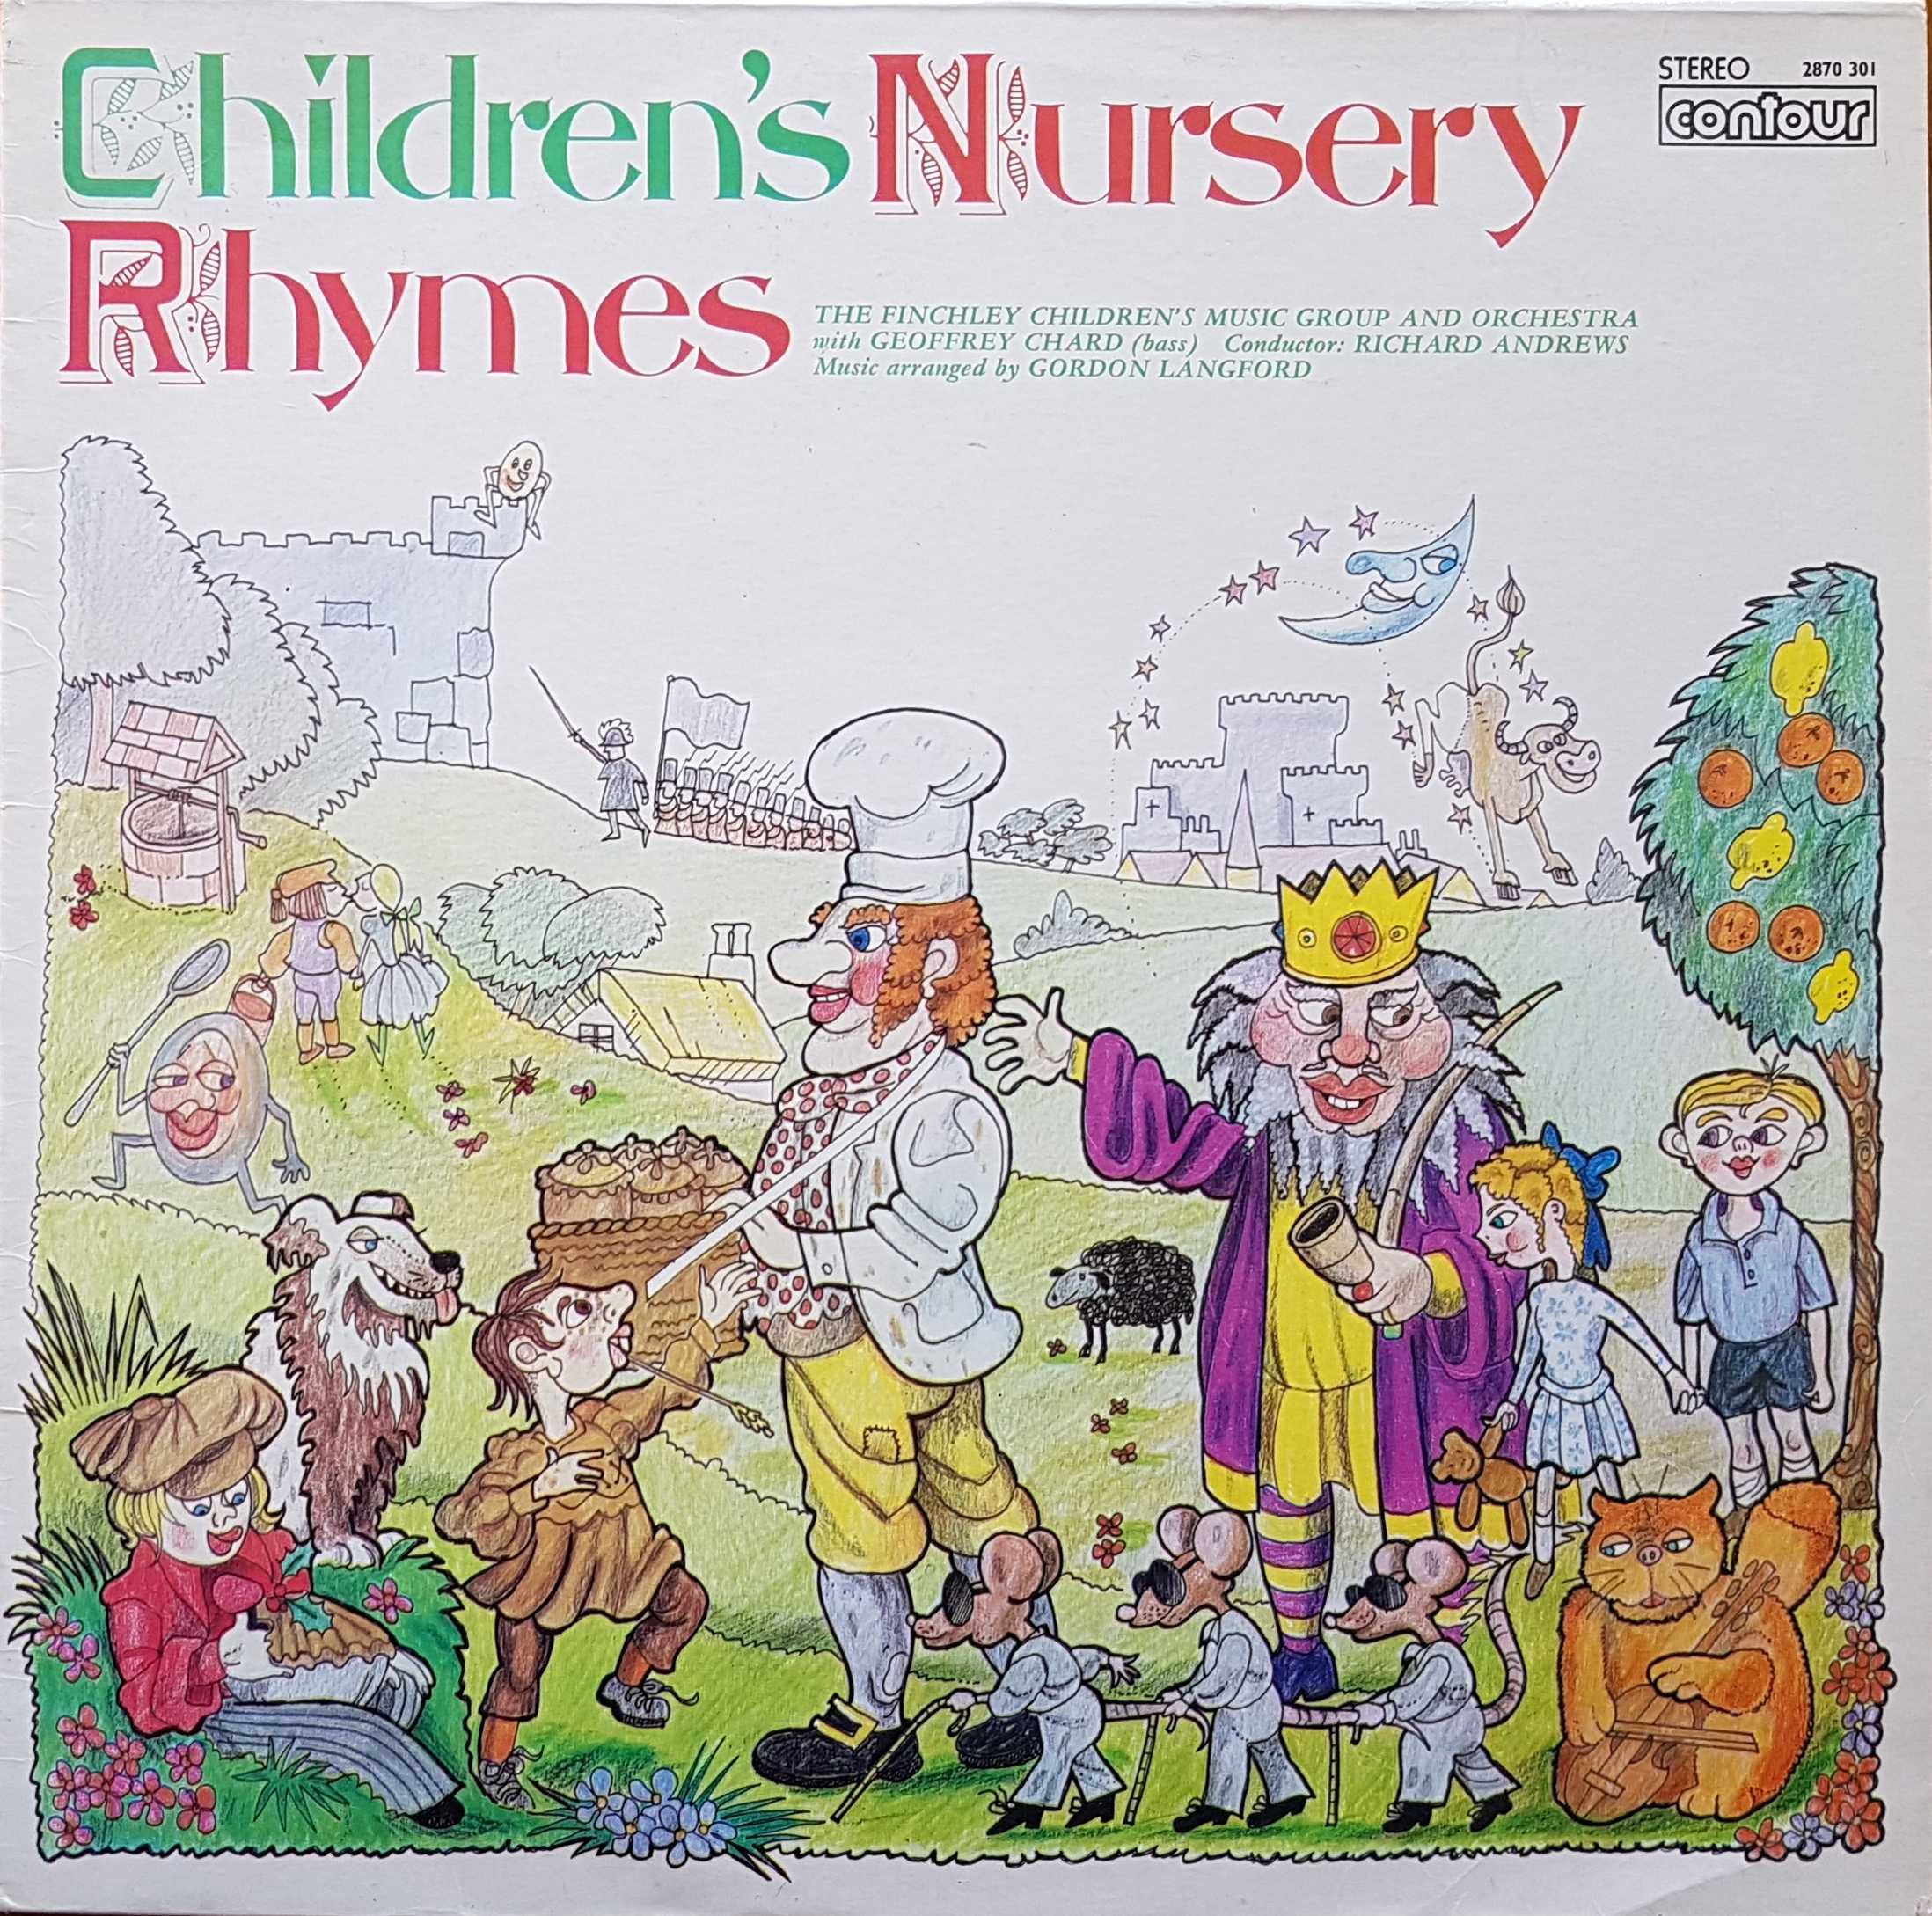 Picture of Children's nursery rhymes by artist Various from ITV, Channel 4 and Channel 5 albums library